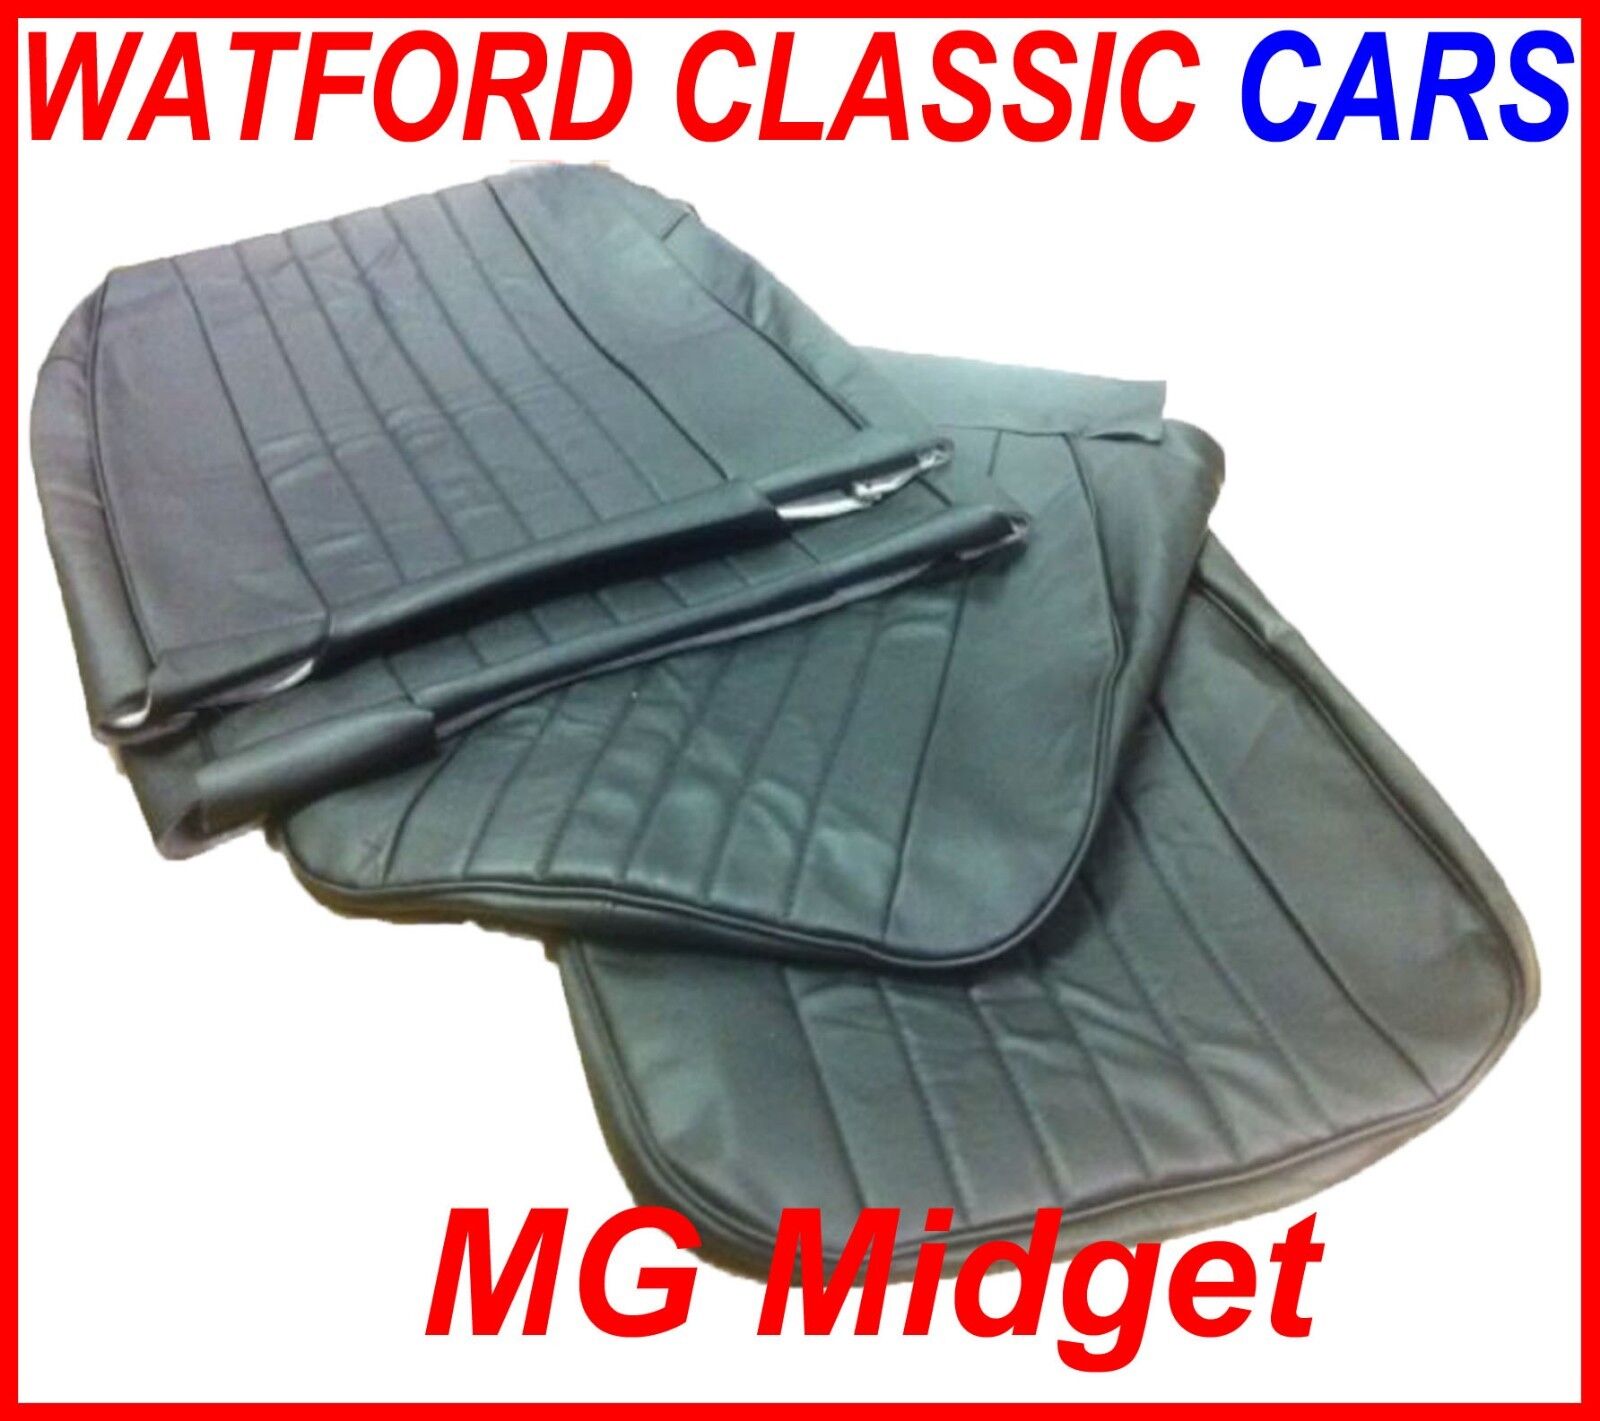 MG Midget / Sprite Pair of Seat Covers 1970 - 1981 Leather look All Black 